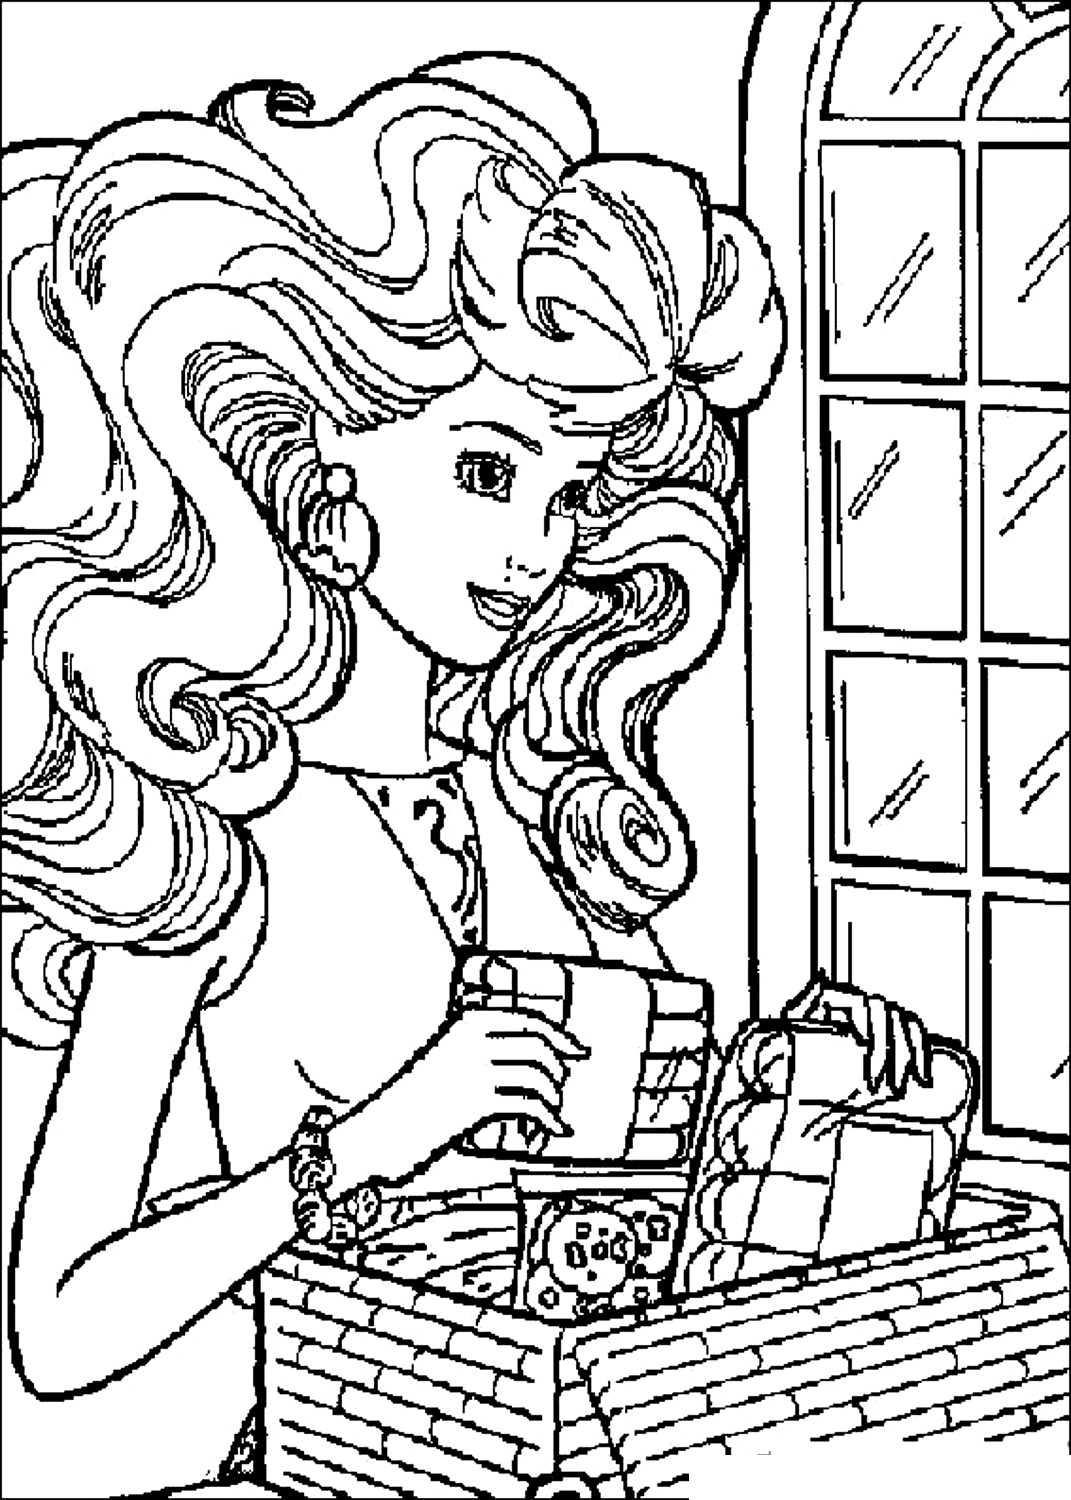 Drawing 13 from Barbie to print and coloring